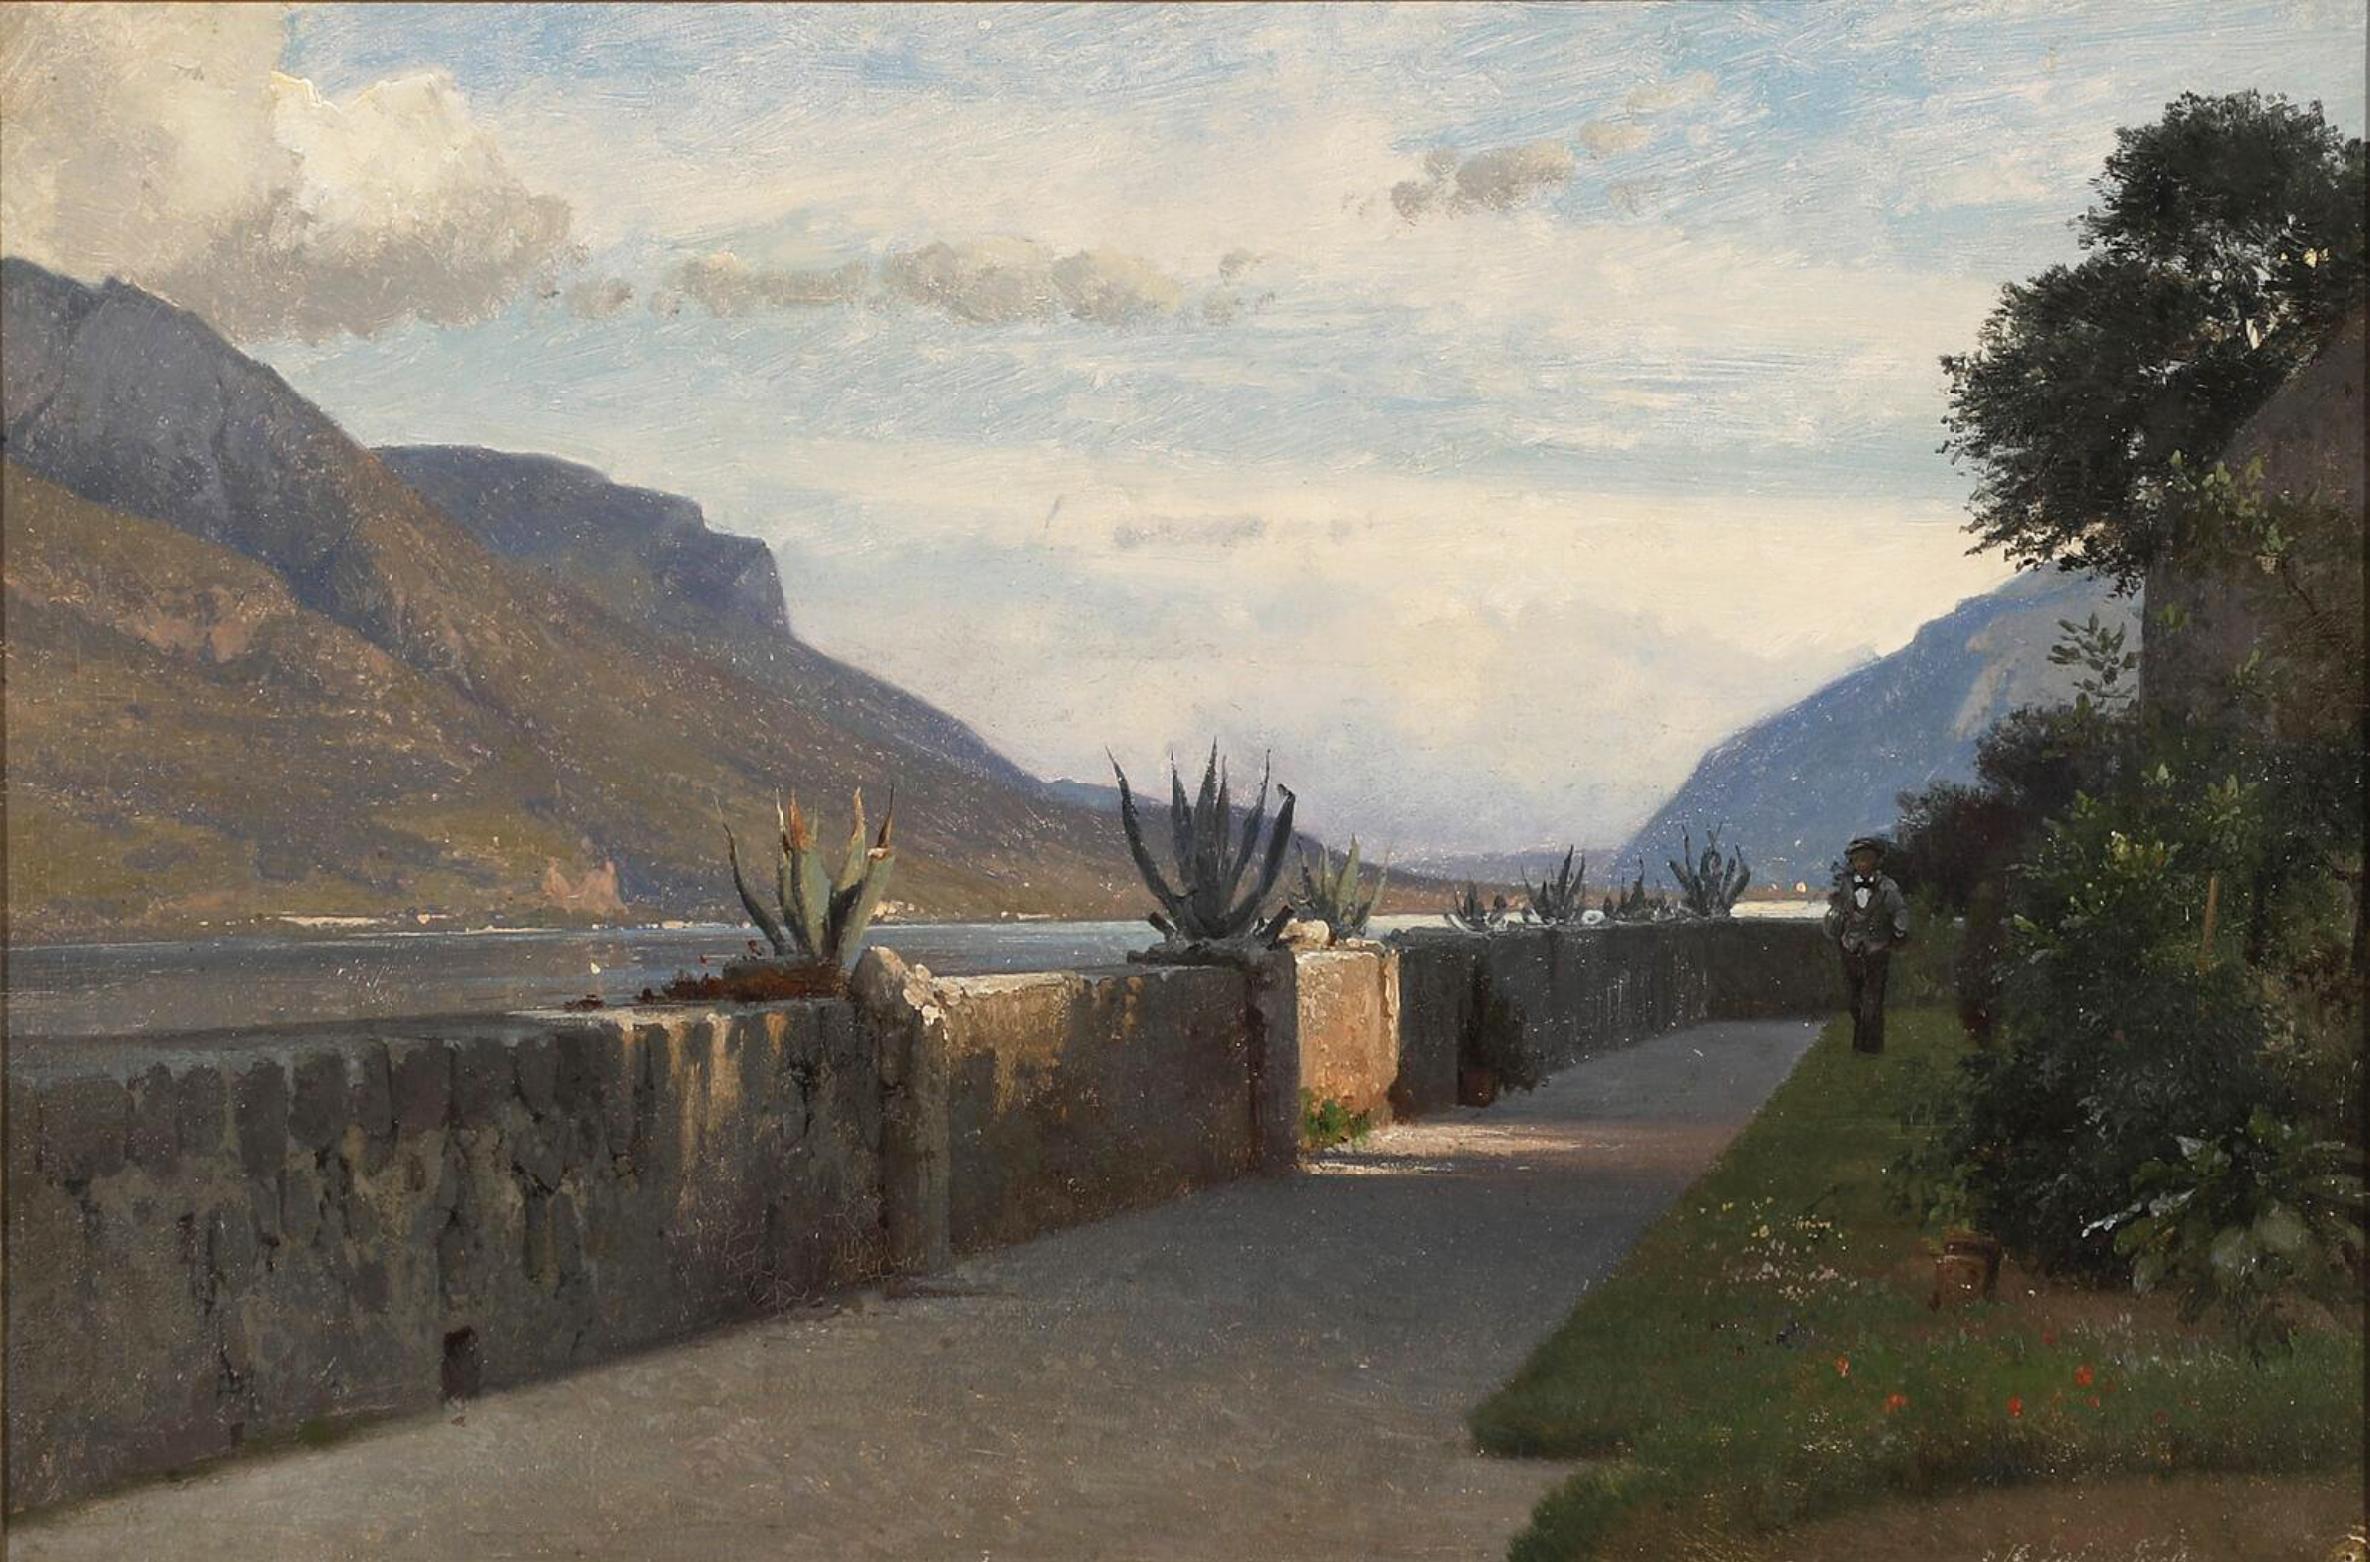 Lake Como, a terrace of the Villa Giulia in Bellagio in Italy - Painting by Frederik Rohde